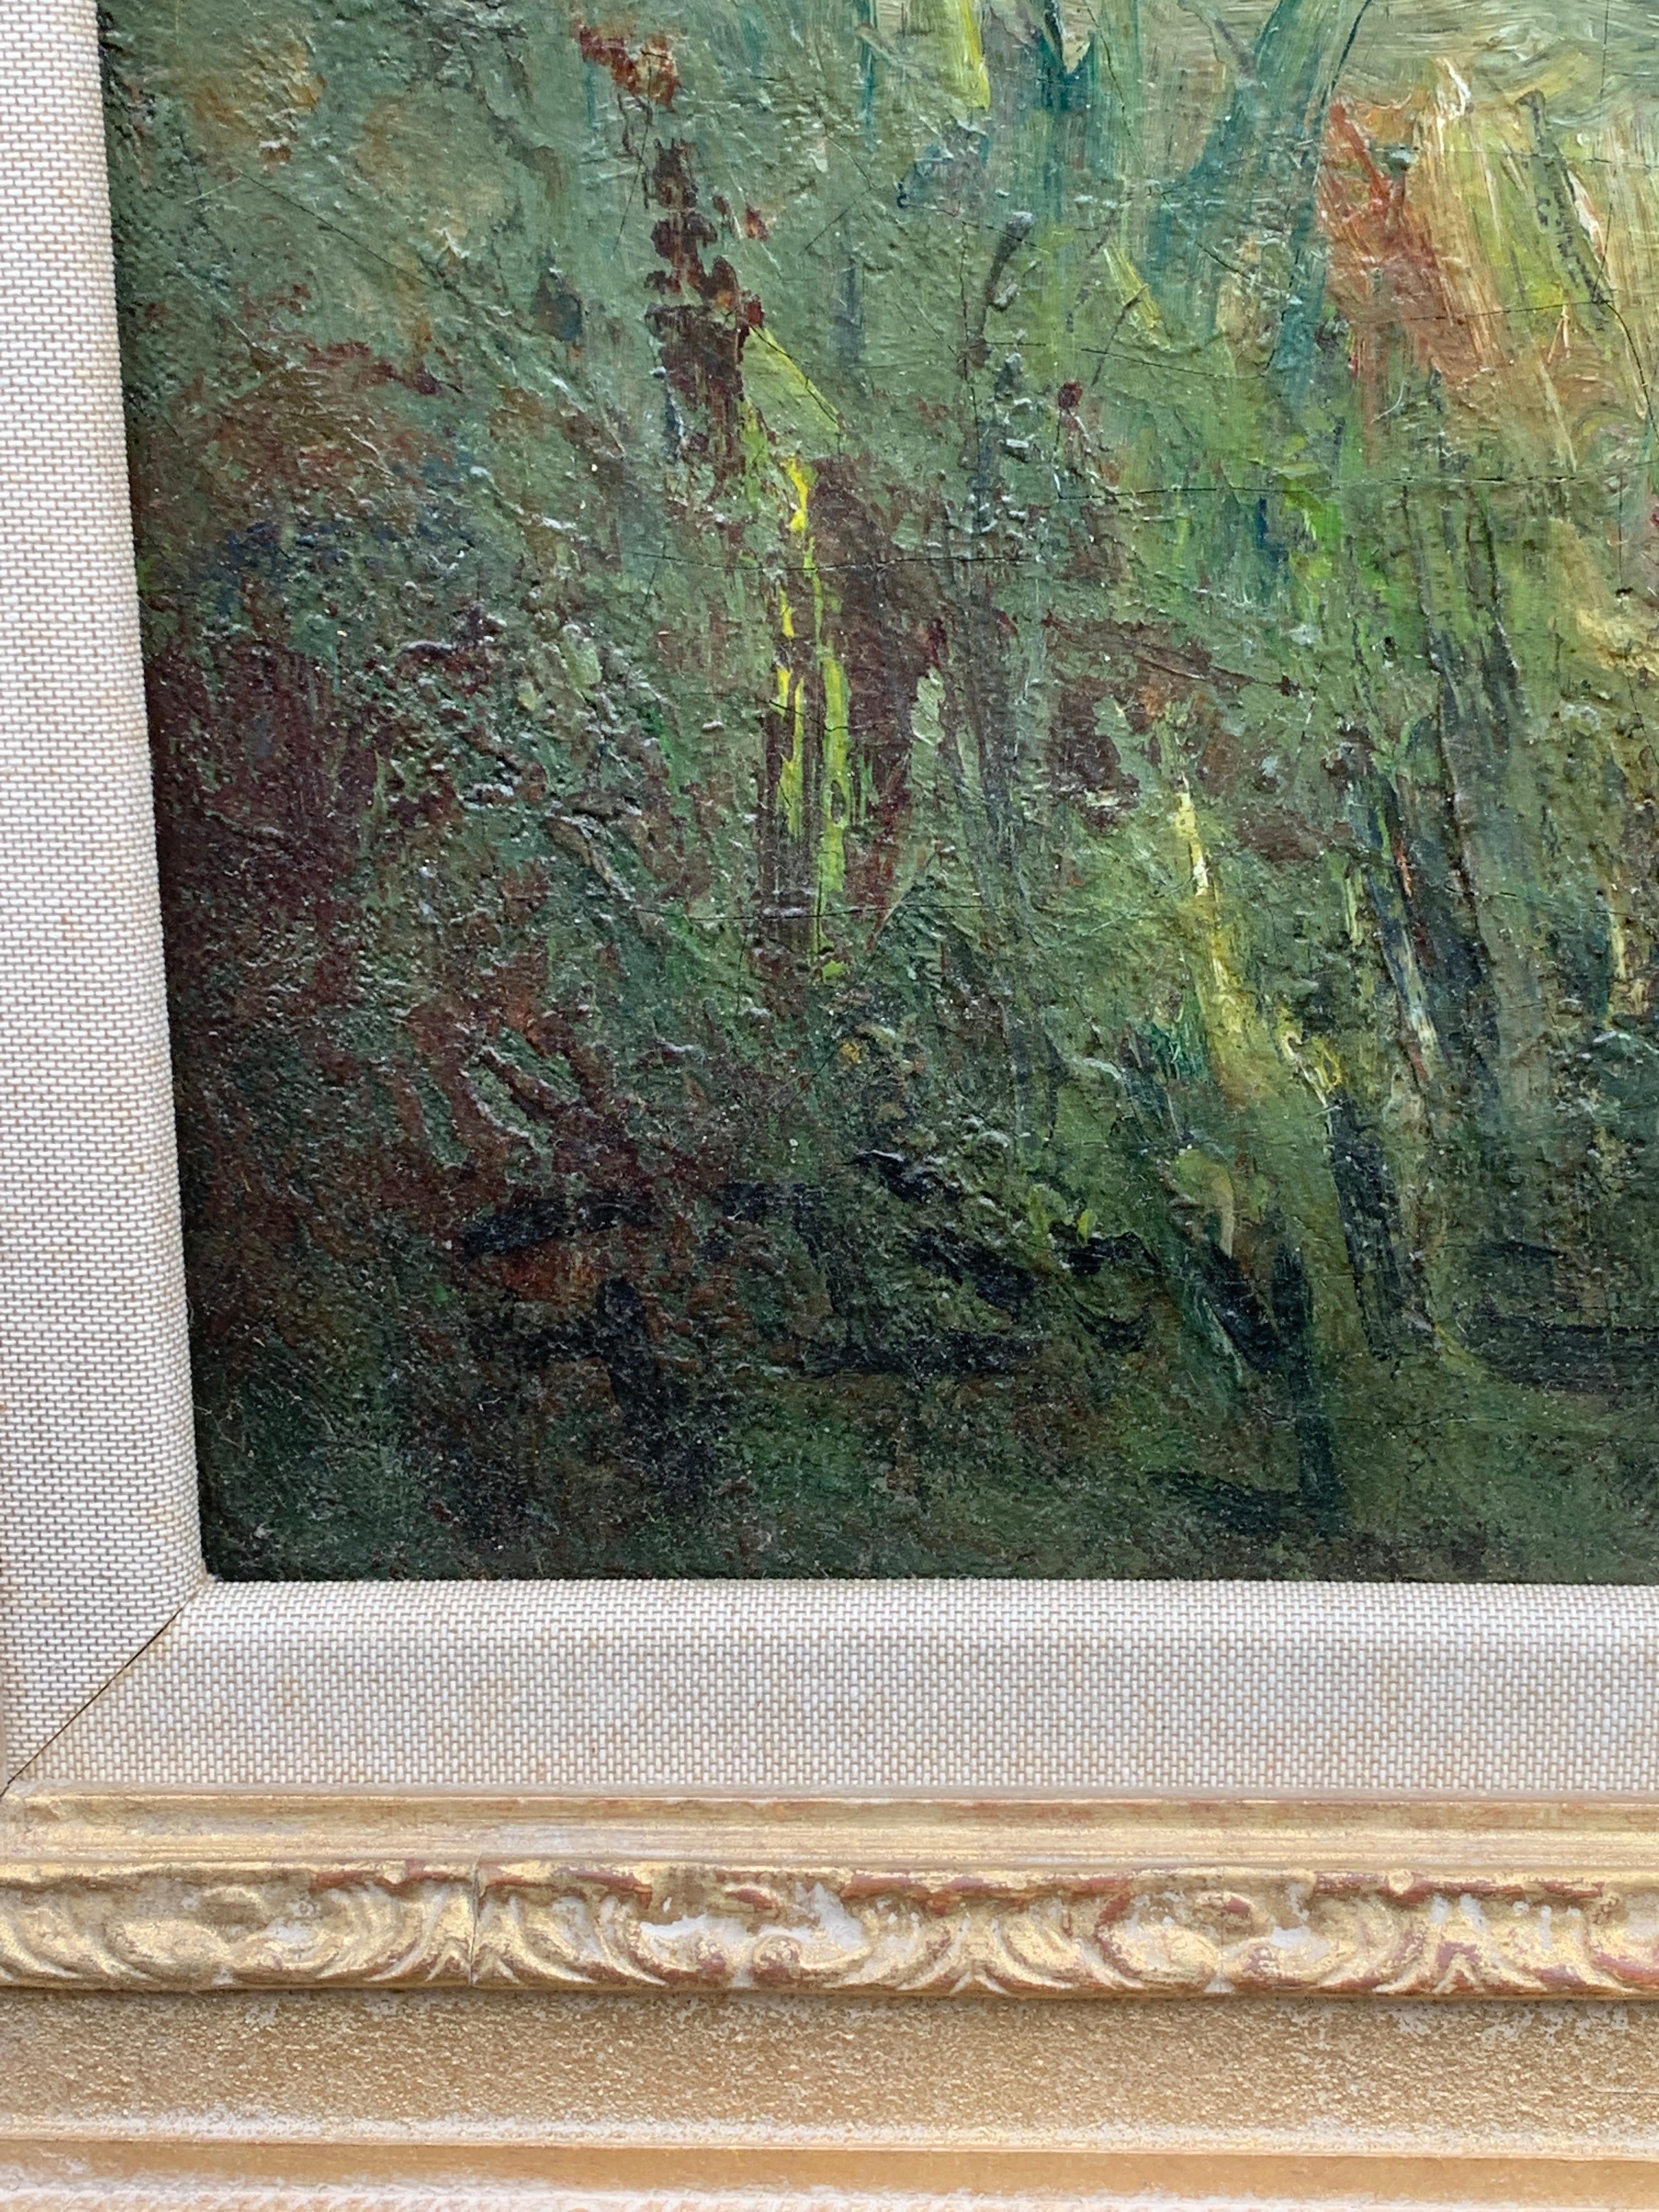 19th century English impressionist scene of the Barbizon forest - Impressionist Painting by George Boyle